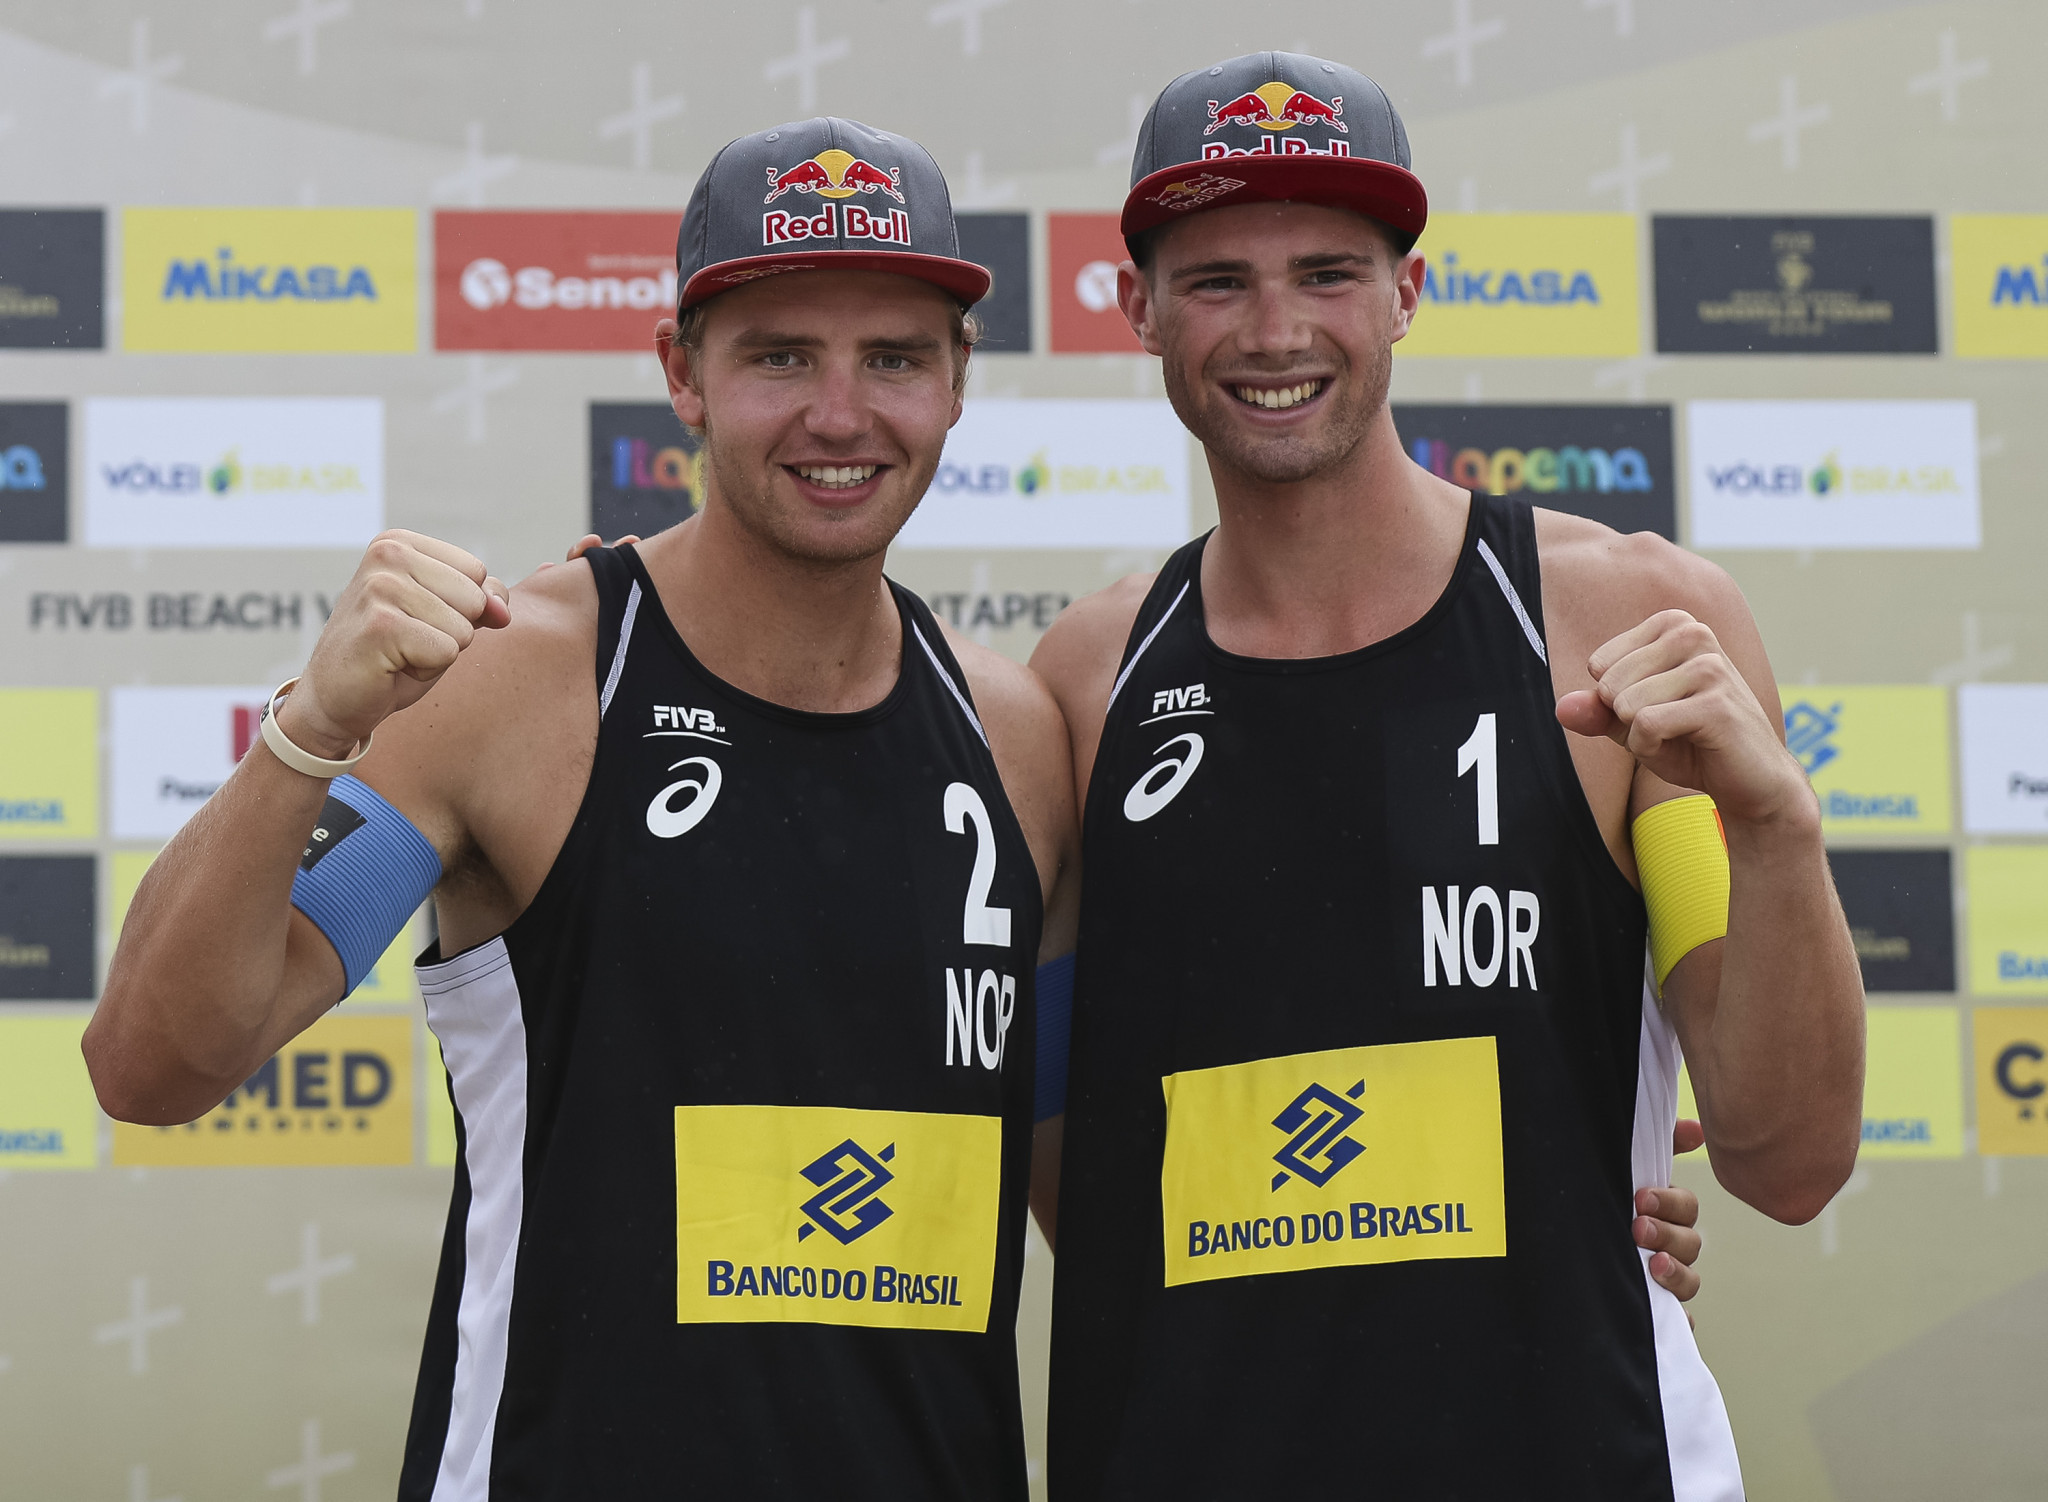 Christian Sørum (L) and Anders Mol of Norway are favourites to win the International Volleyball Federation (FIVB) Beach World Tour event in Ostrava, Czech Republic ©Getty Images